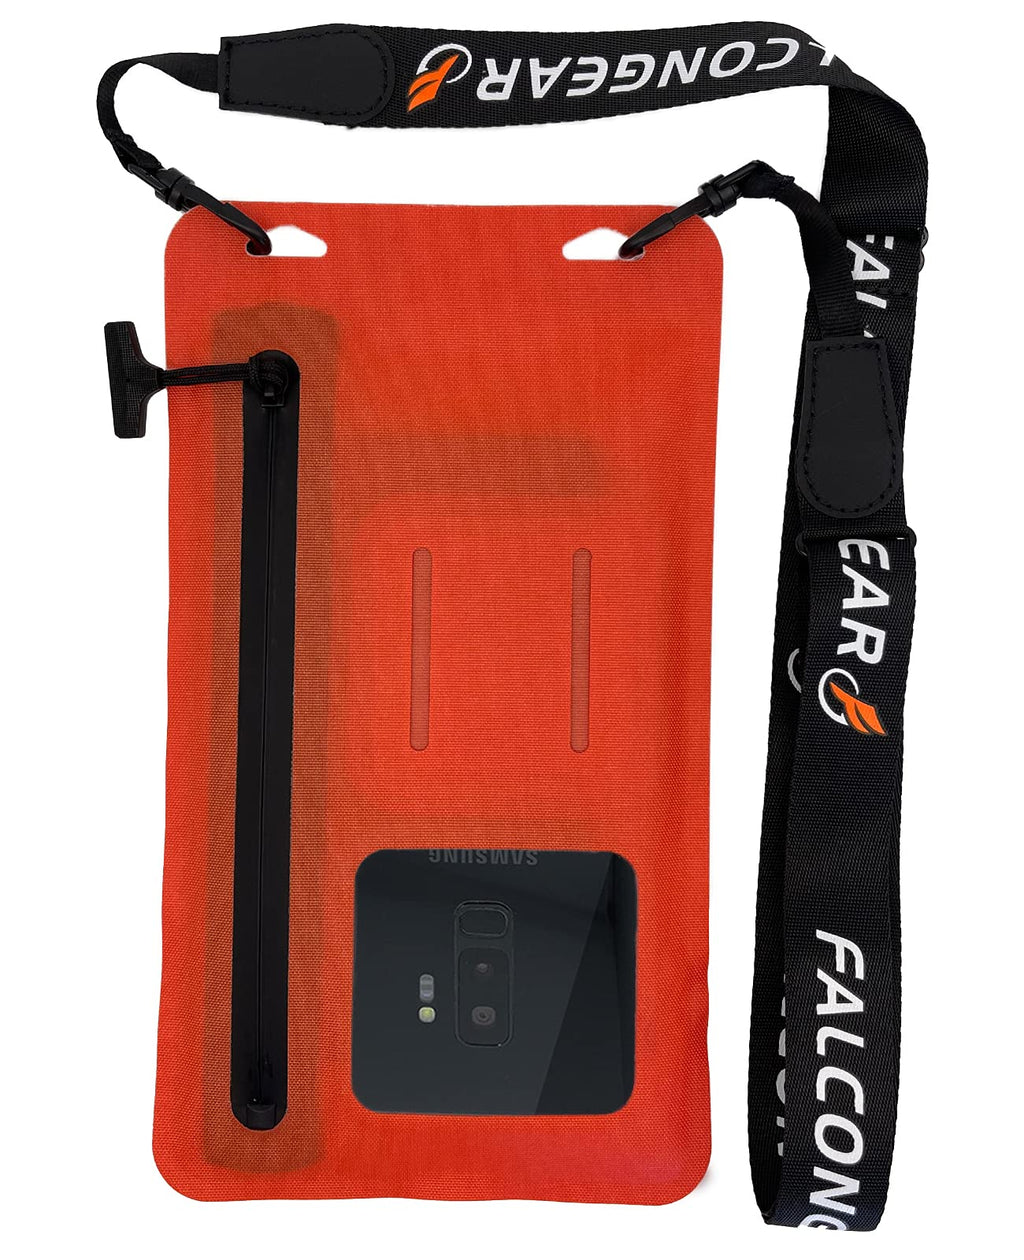  [AUSTRALIA] - FalconGear Floating Waterproof Phone Pouch Universal Waterproof Phone Case with Zipper & Adjustable Lanyard Cellphone Dry Bag for iPhone 12/11 Pro Max XR Galaxy S21/20 Ultra & Up to 7.5” (Orange-Red) Orange-Red